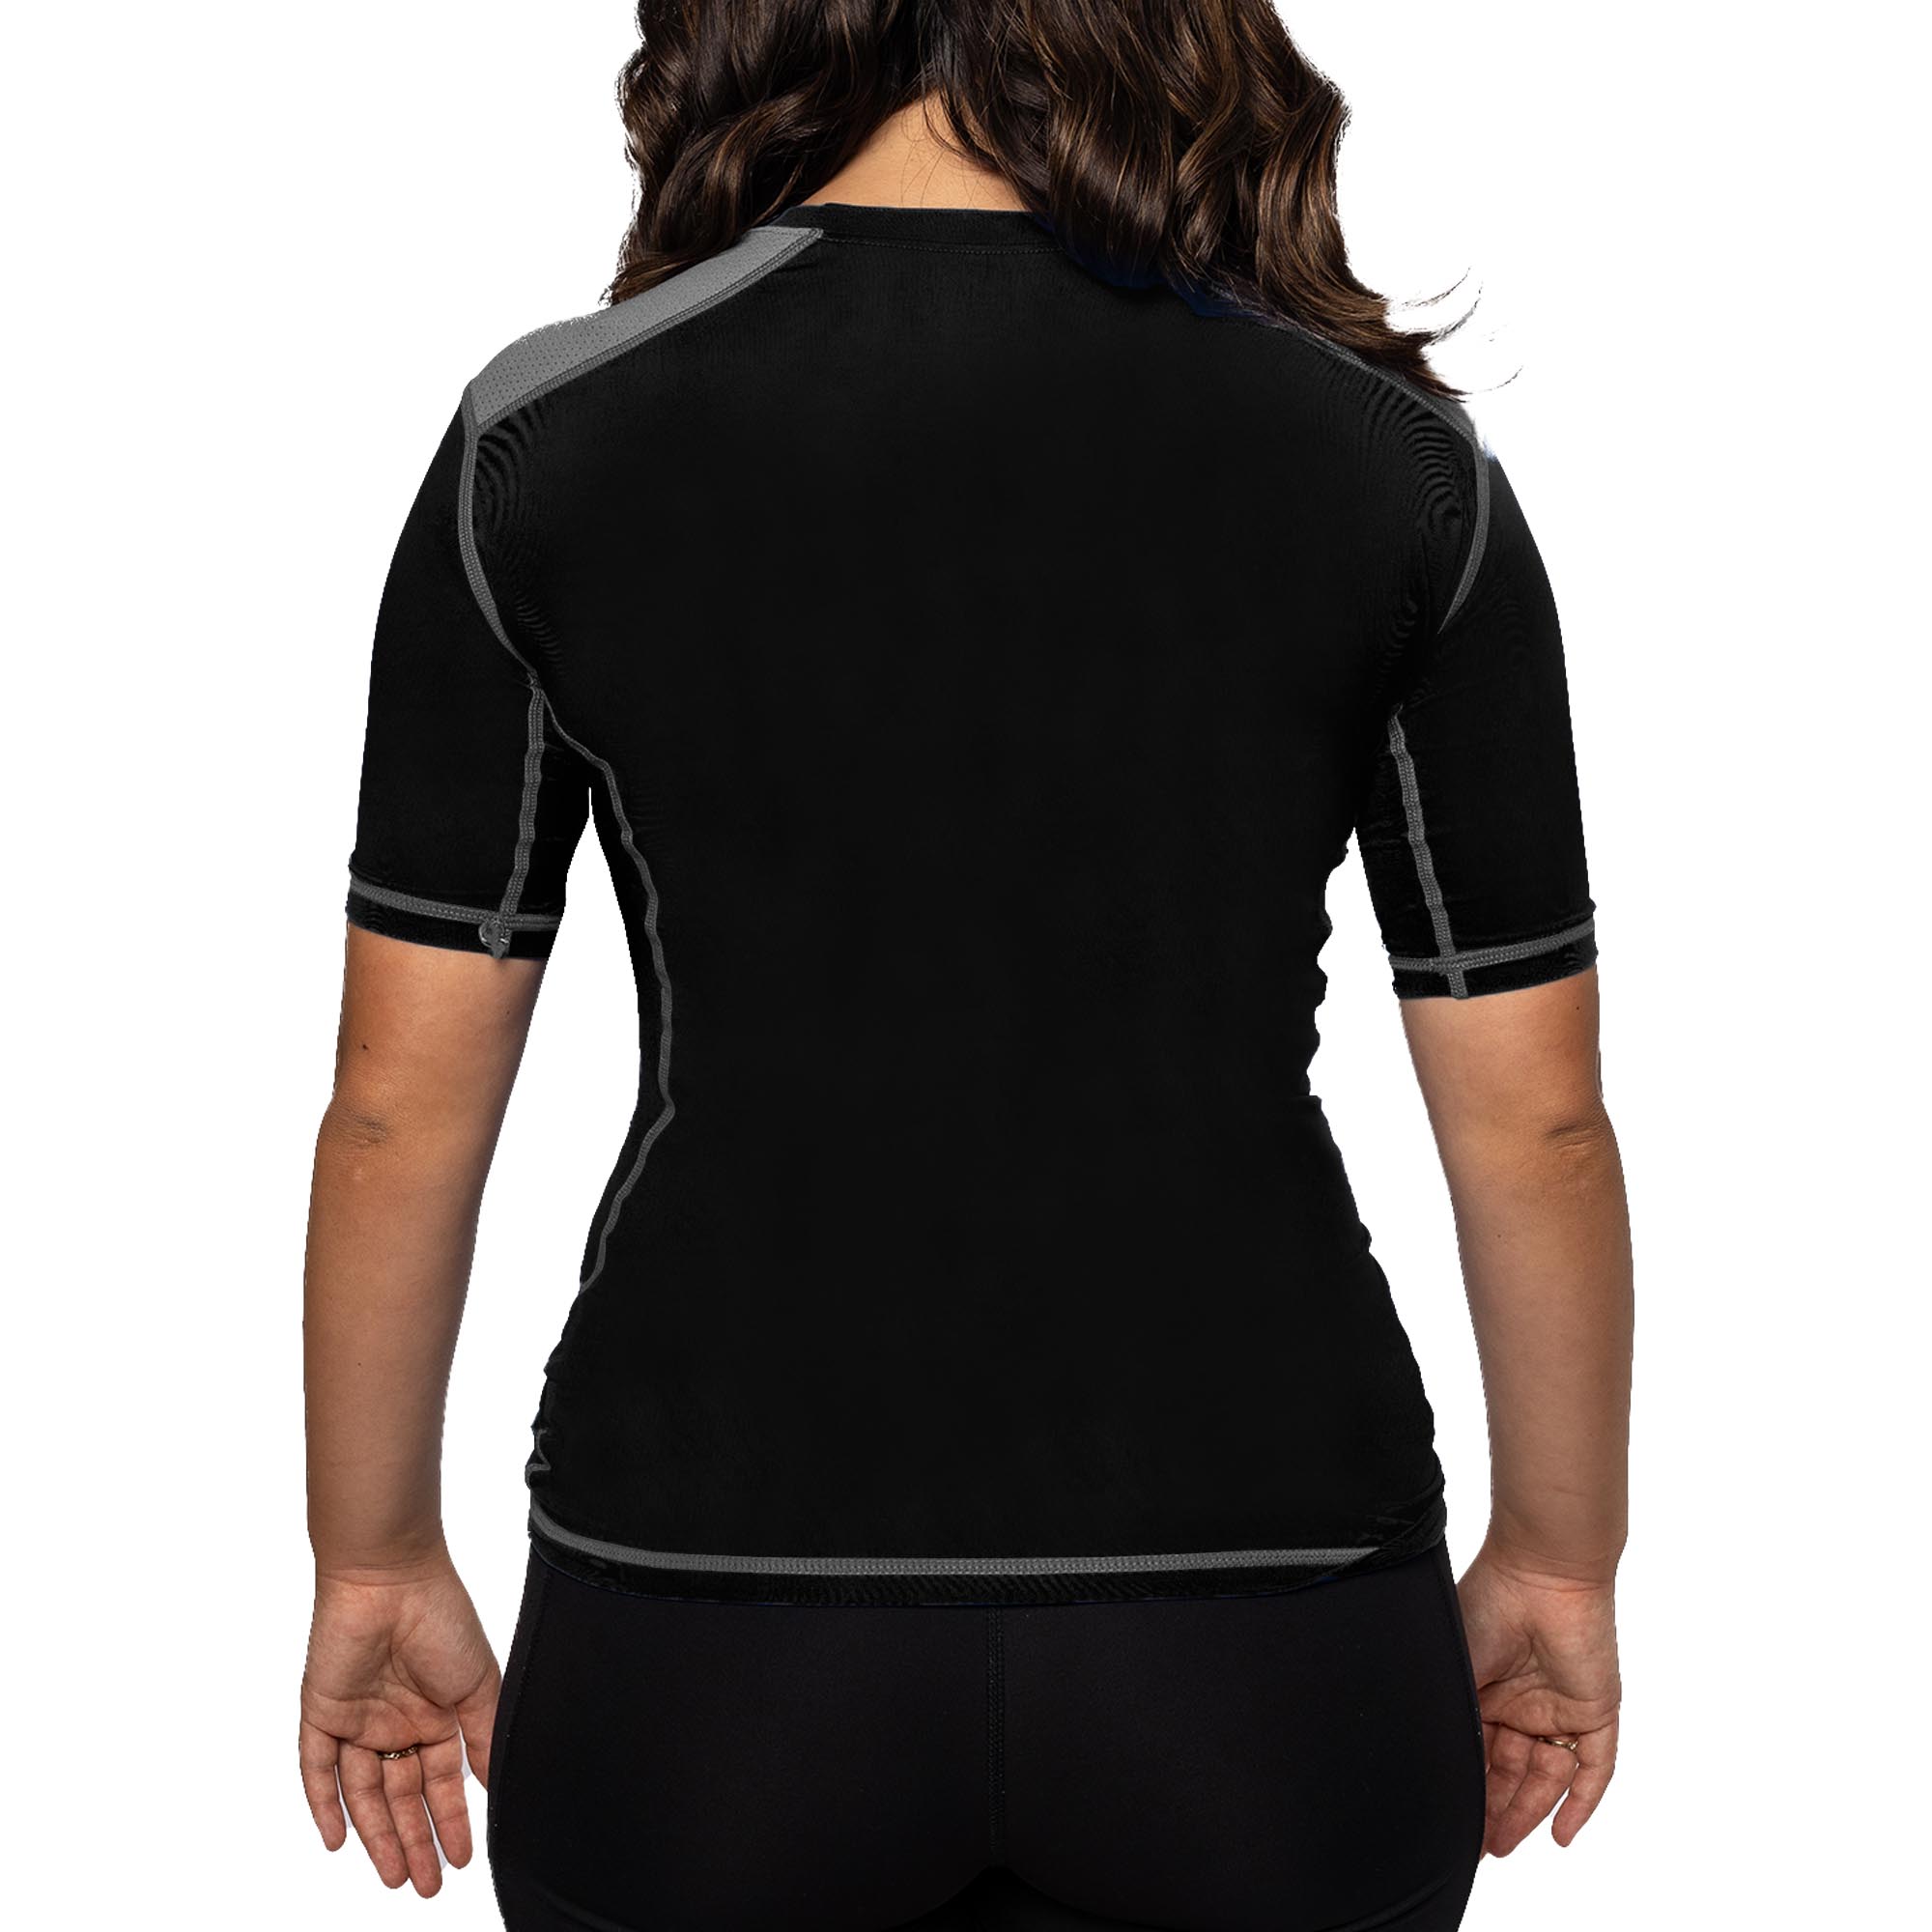 CombatX Summer Compression Shirt - Adult Female - SPECIAL DEAL